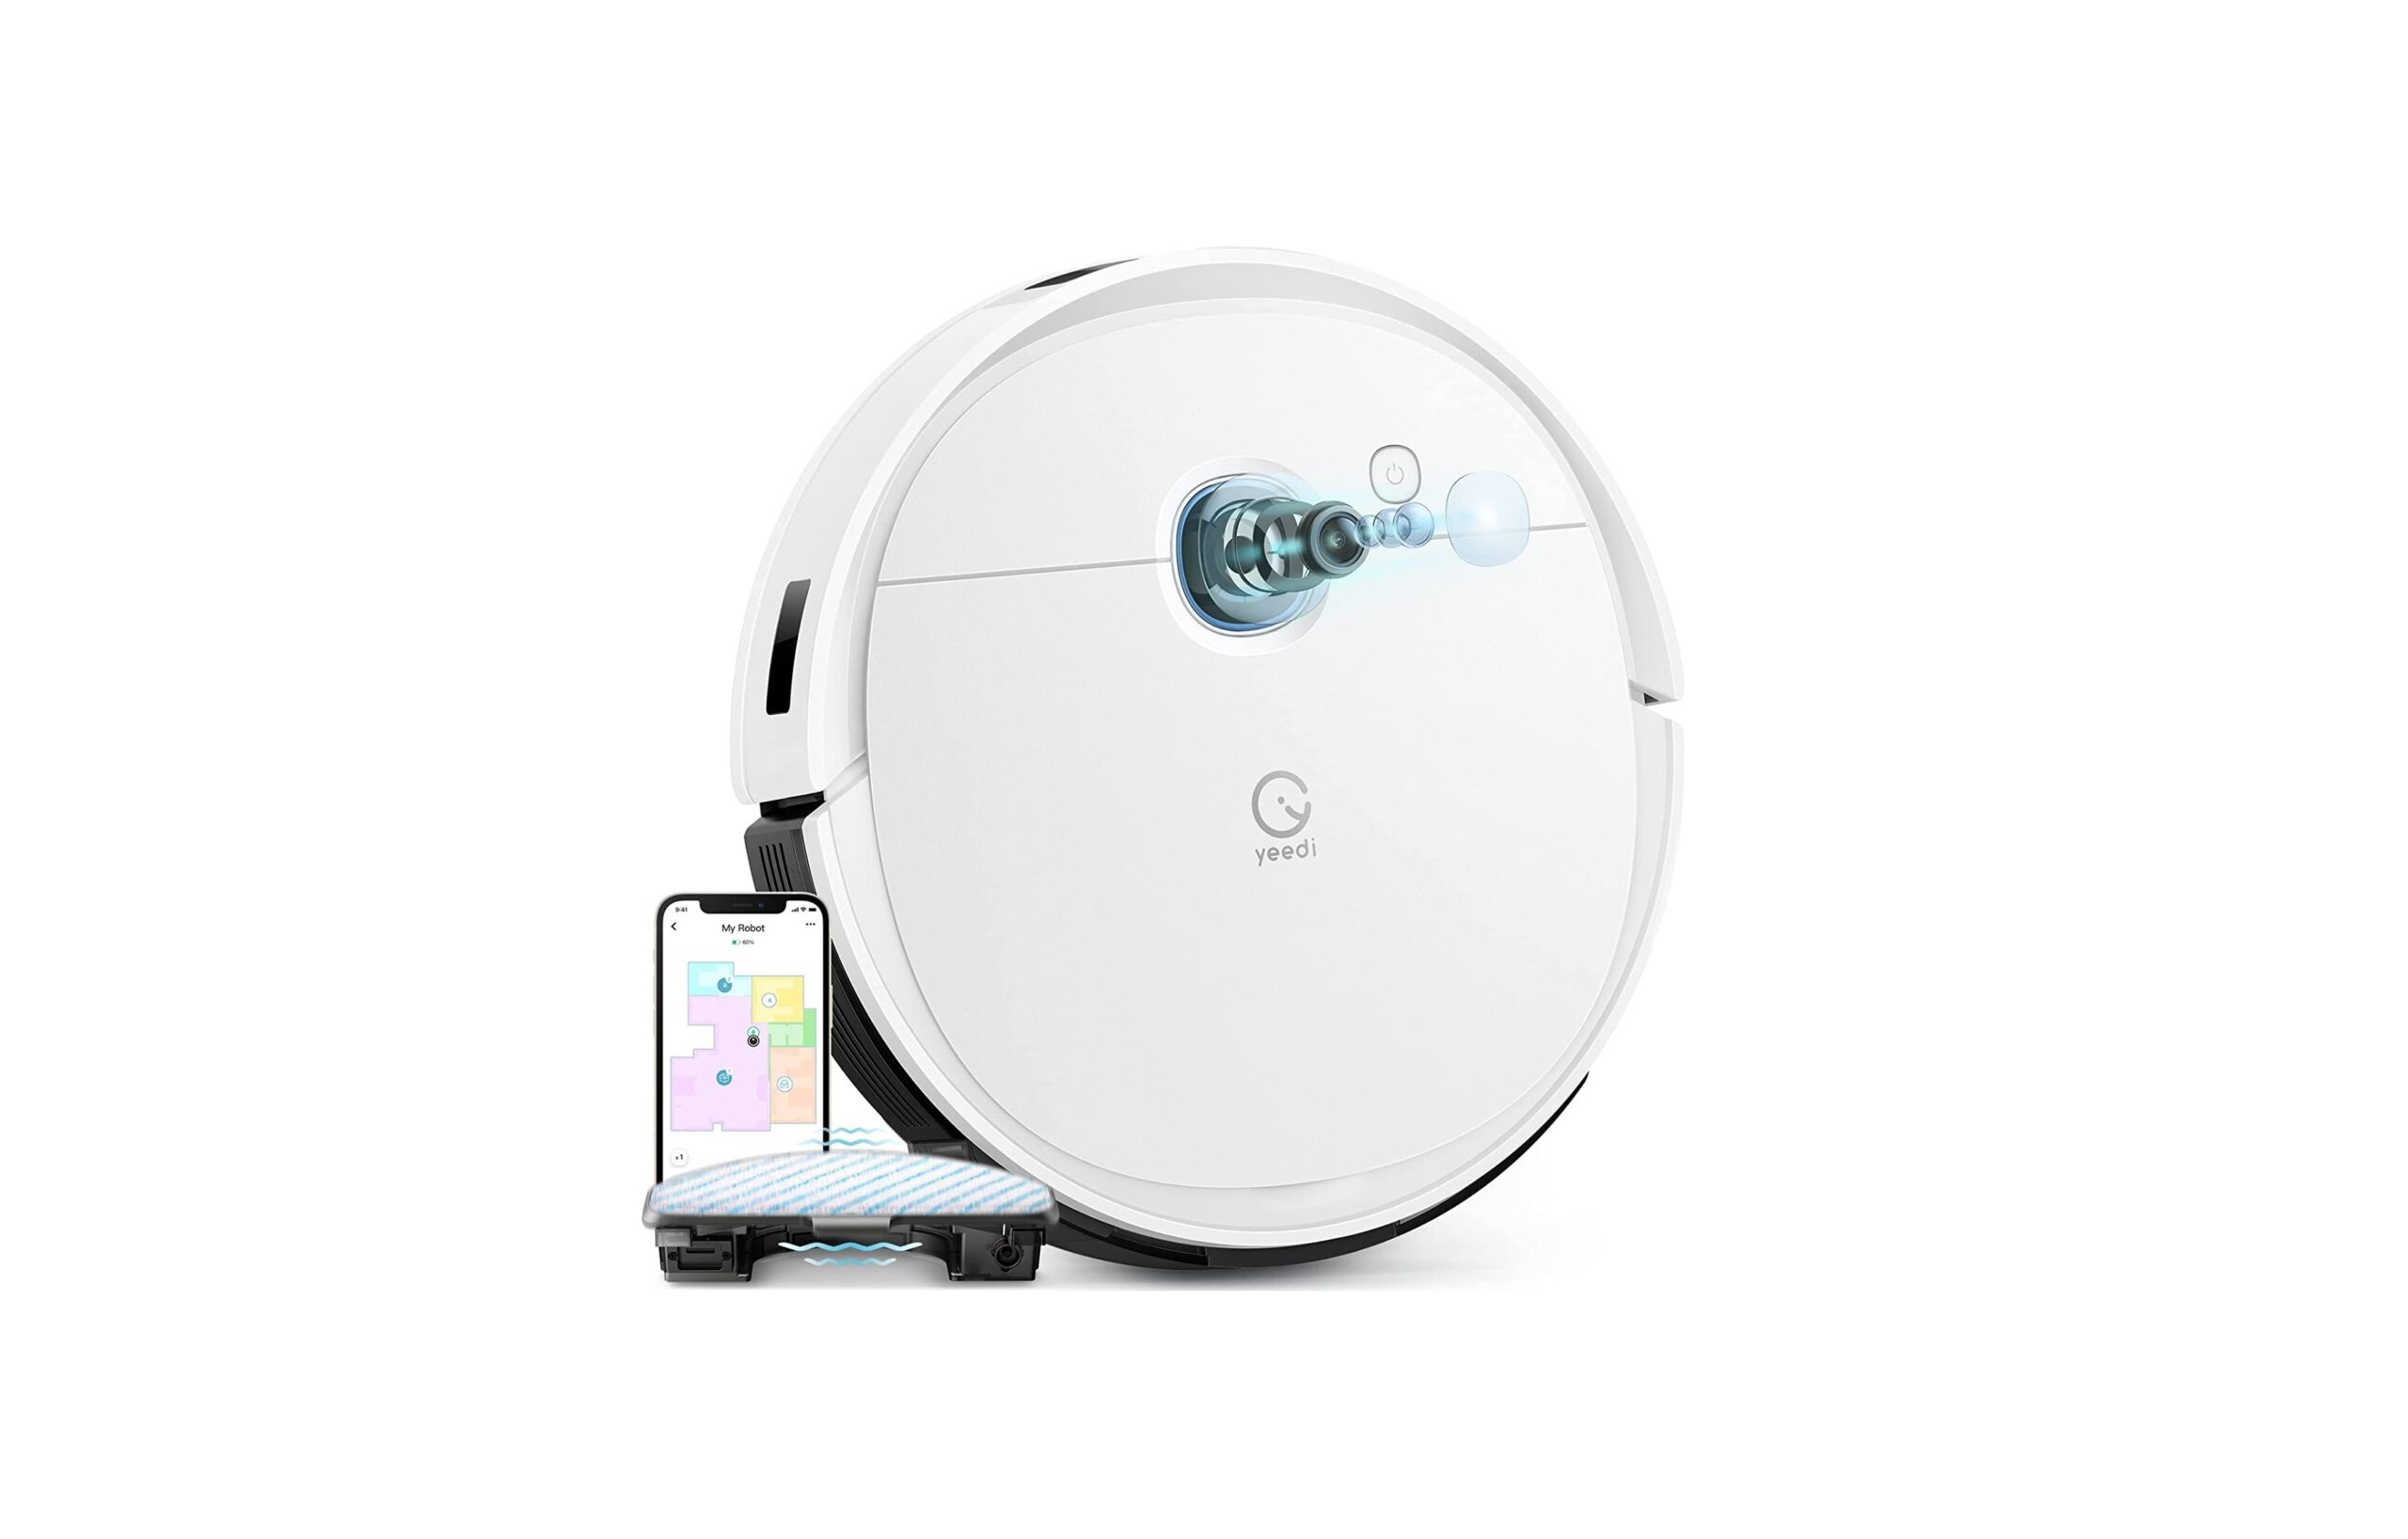 The yeedi vac 2 pro robot vacuum cleaner is on offer in advance of Amazon's Prime Day thumbnail